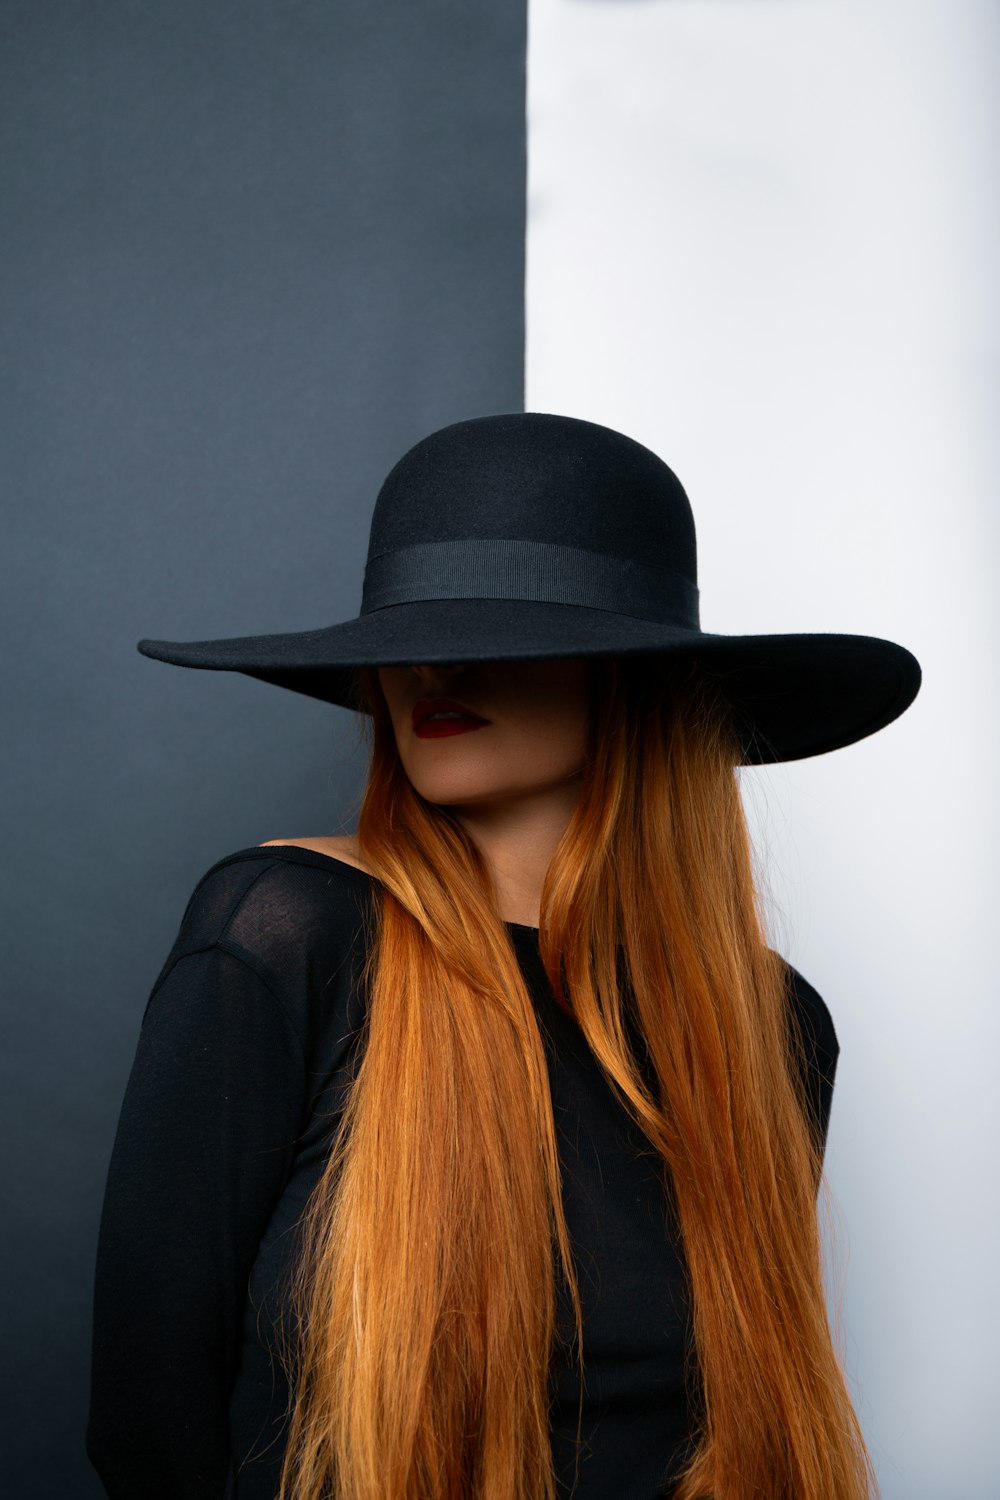 a woman with long red hair wearing a black hat